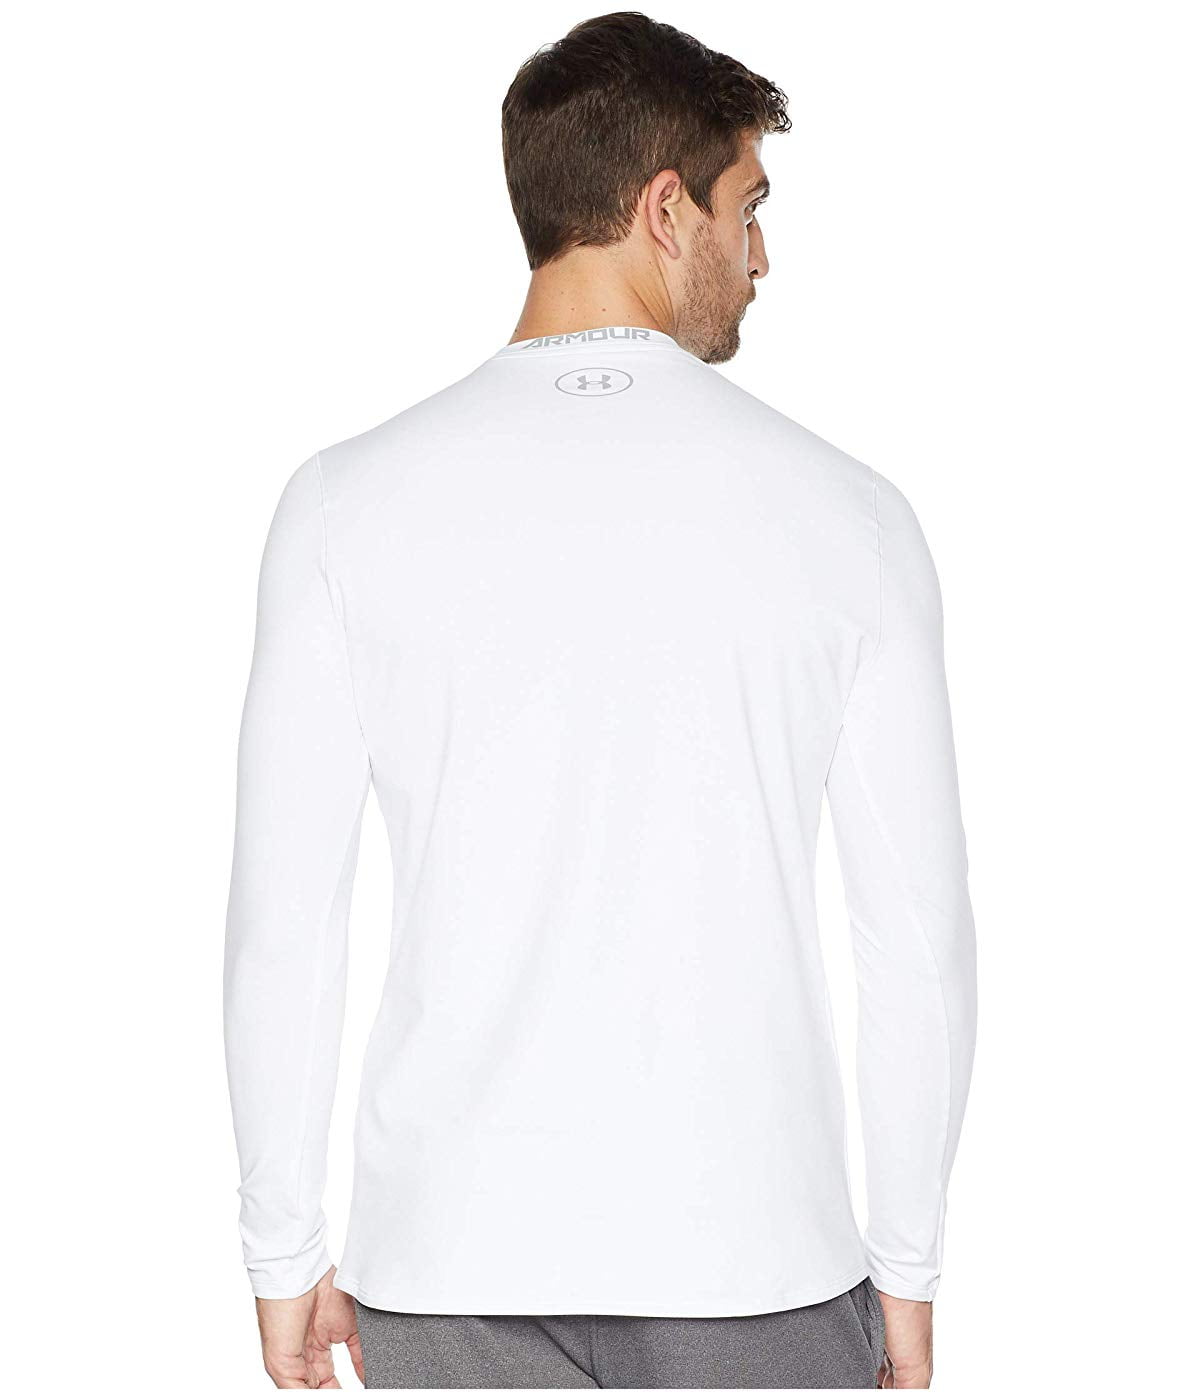 Under Armour Men's ColdGear Fitted Crew Long Sleeve Shirt 